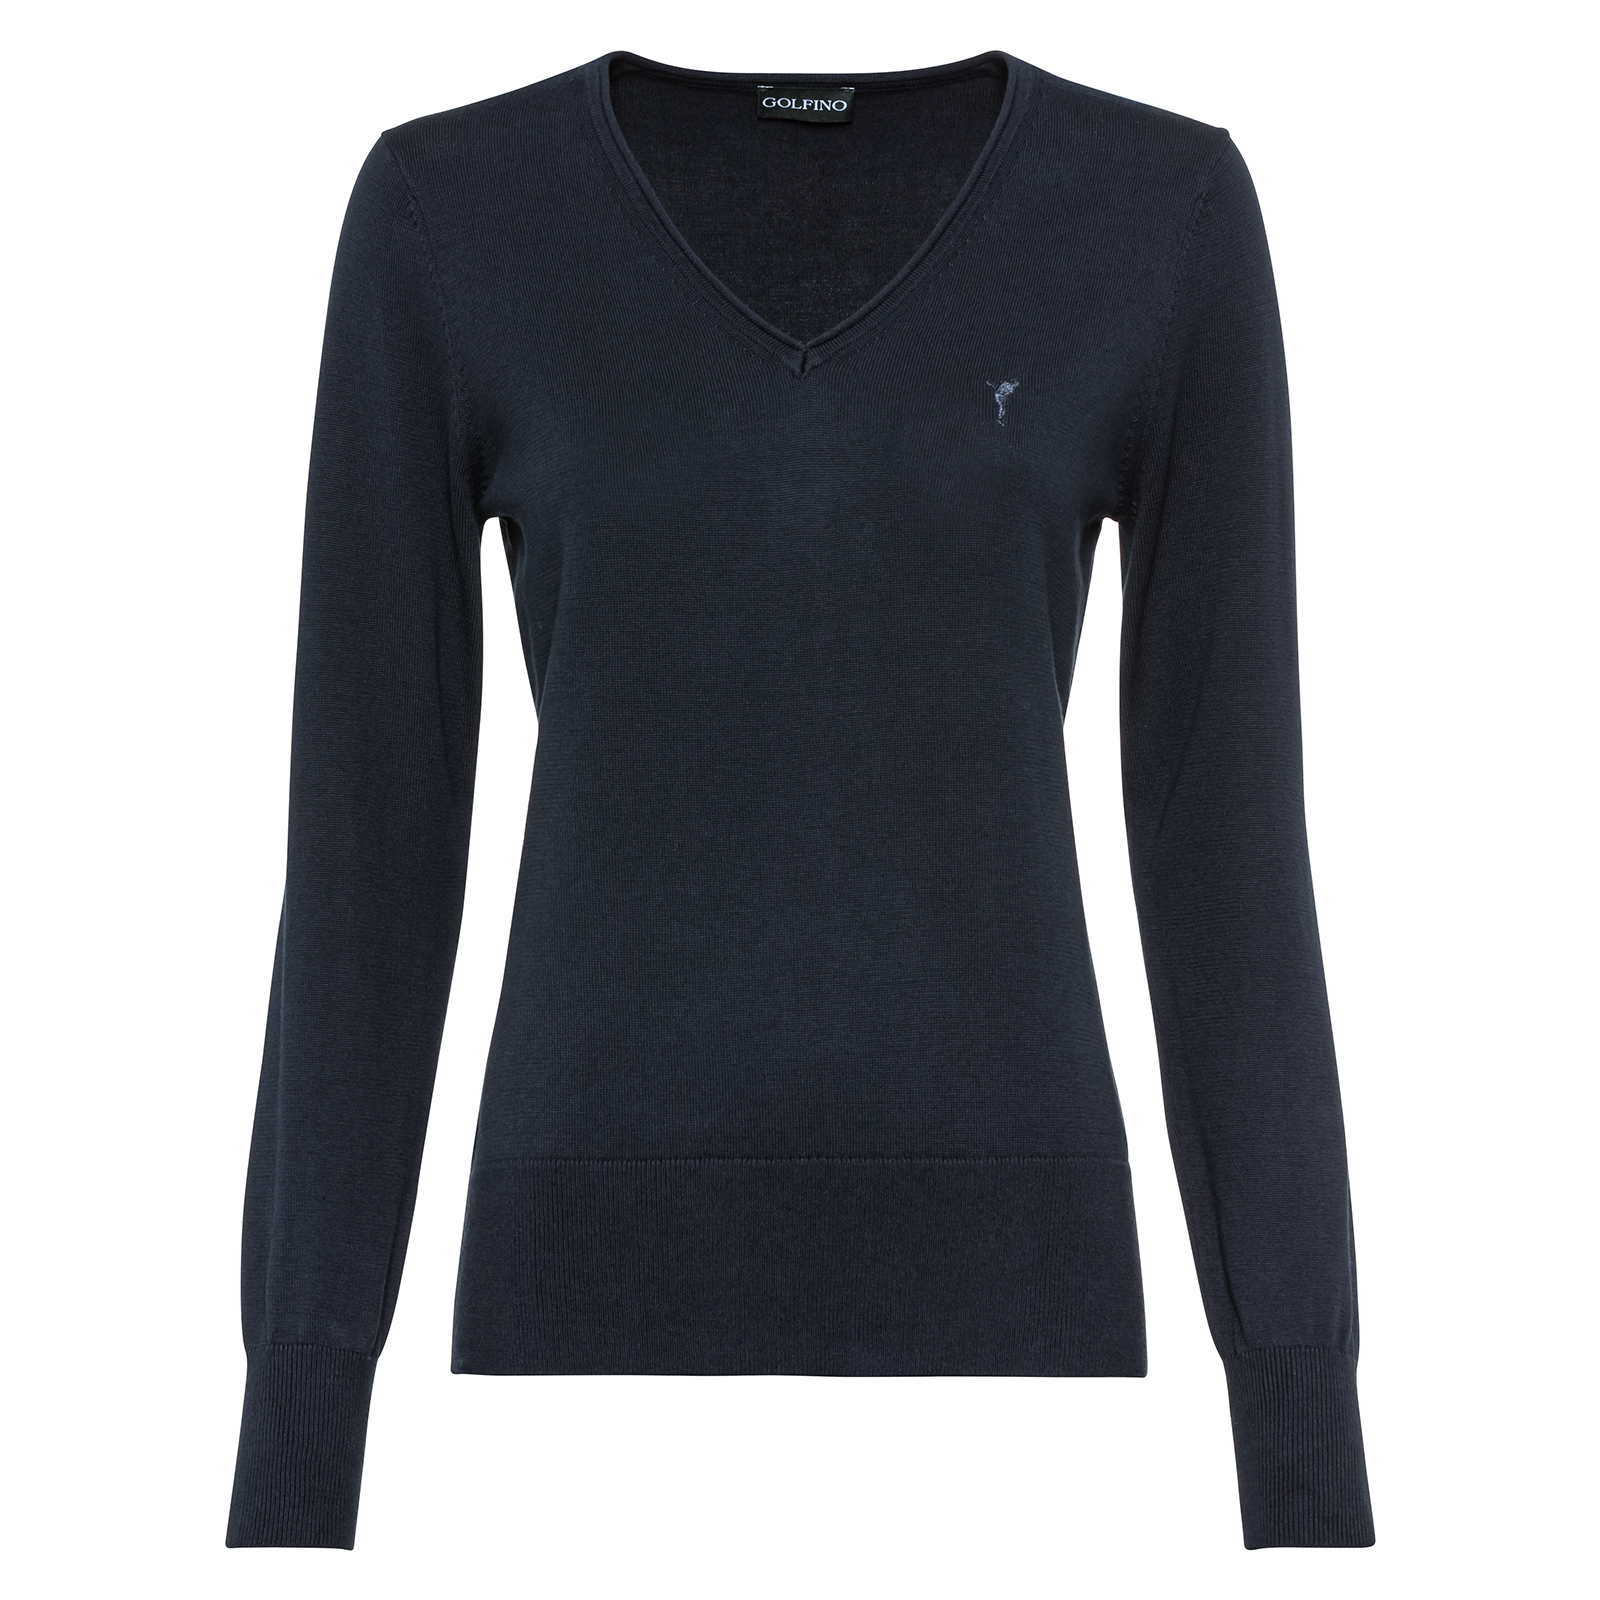 Ladies' golf pullover made from extra-soft cotton with V-neck